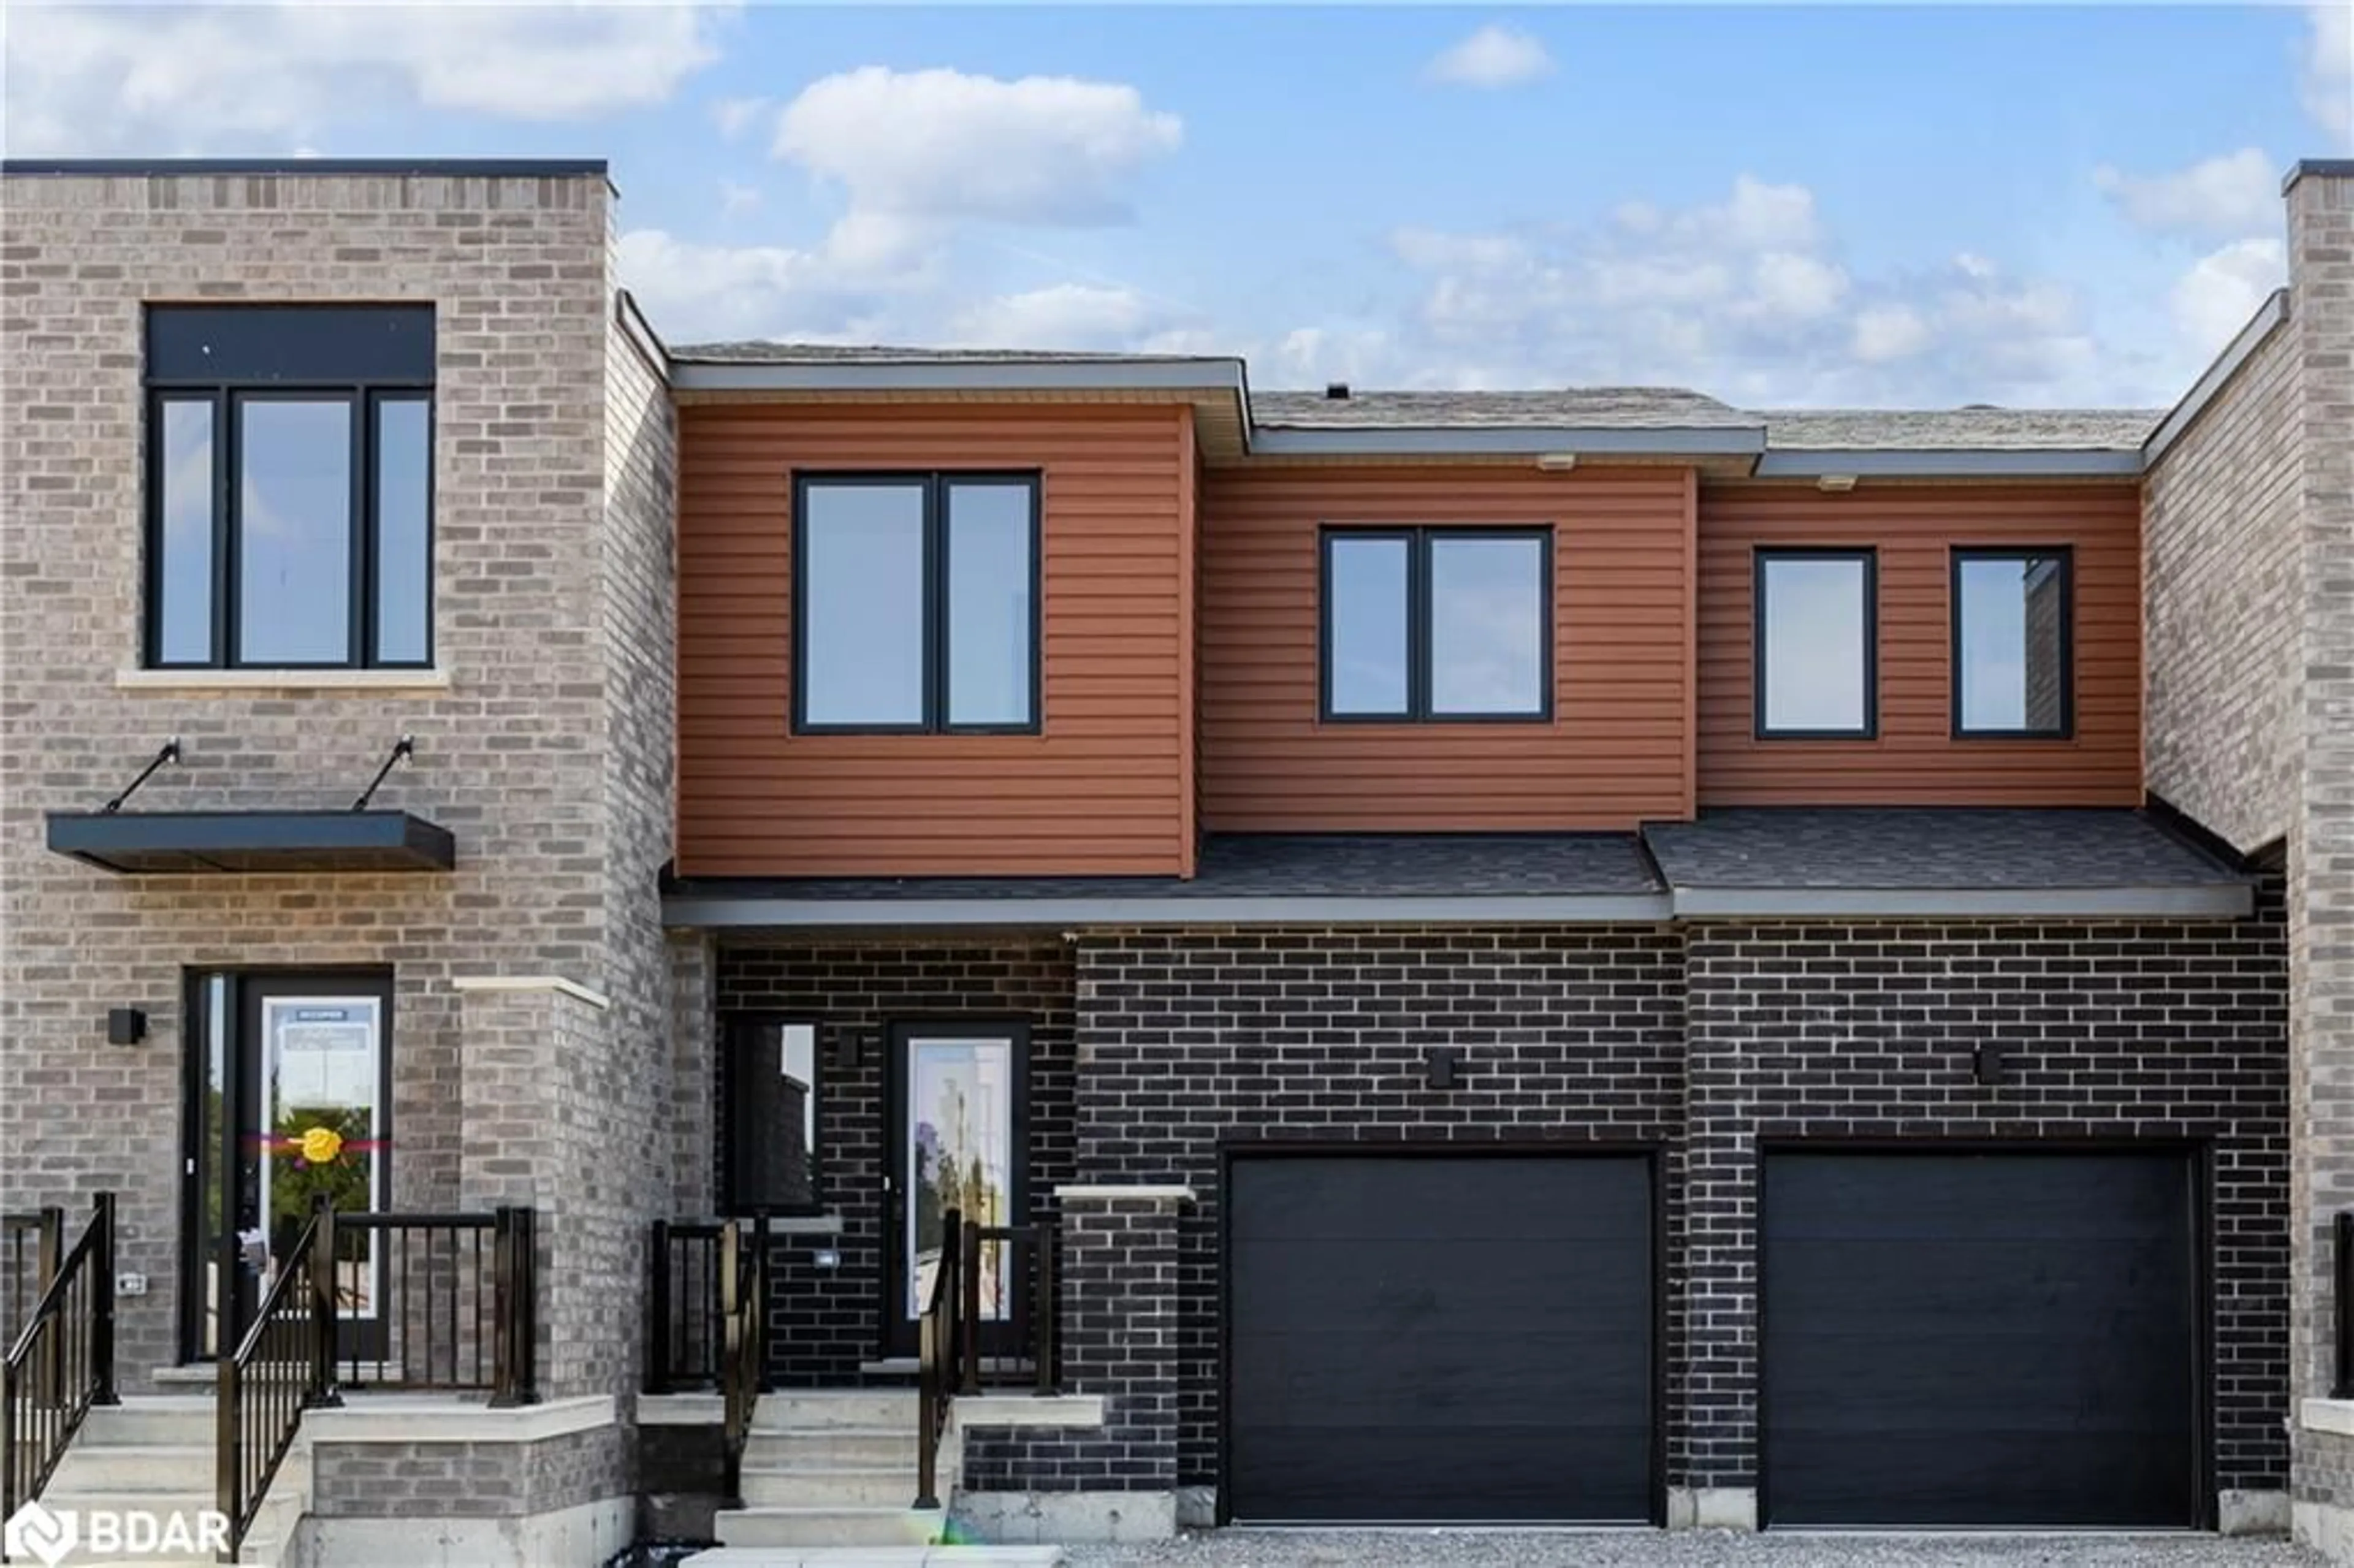 Home with brick exterior material for 137 Turnberry Lane, Barrie Ontario L9J 0M8